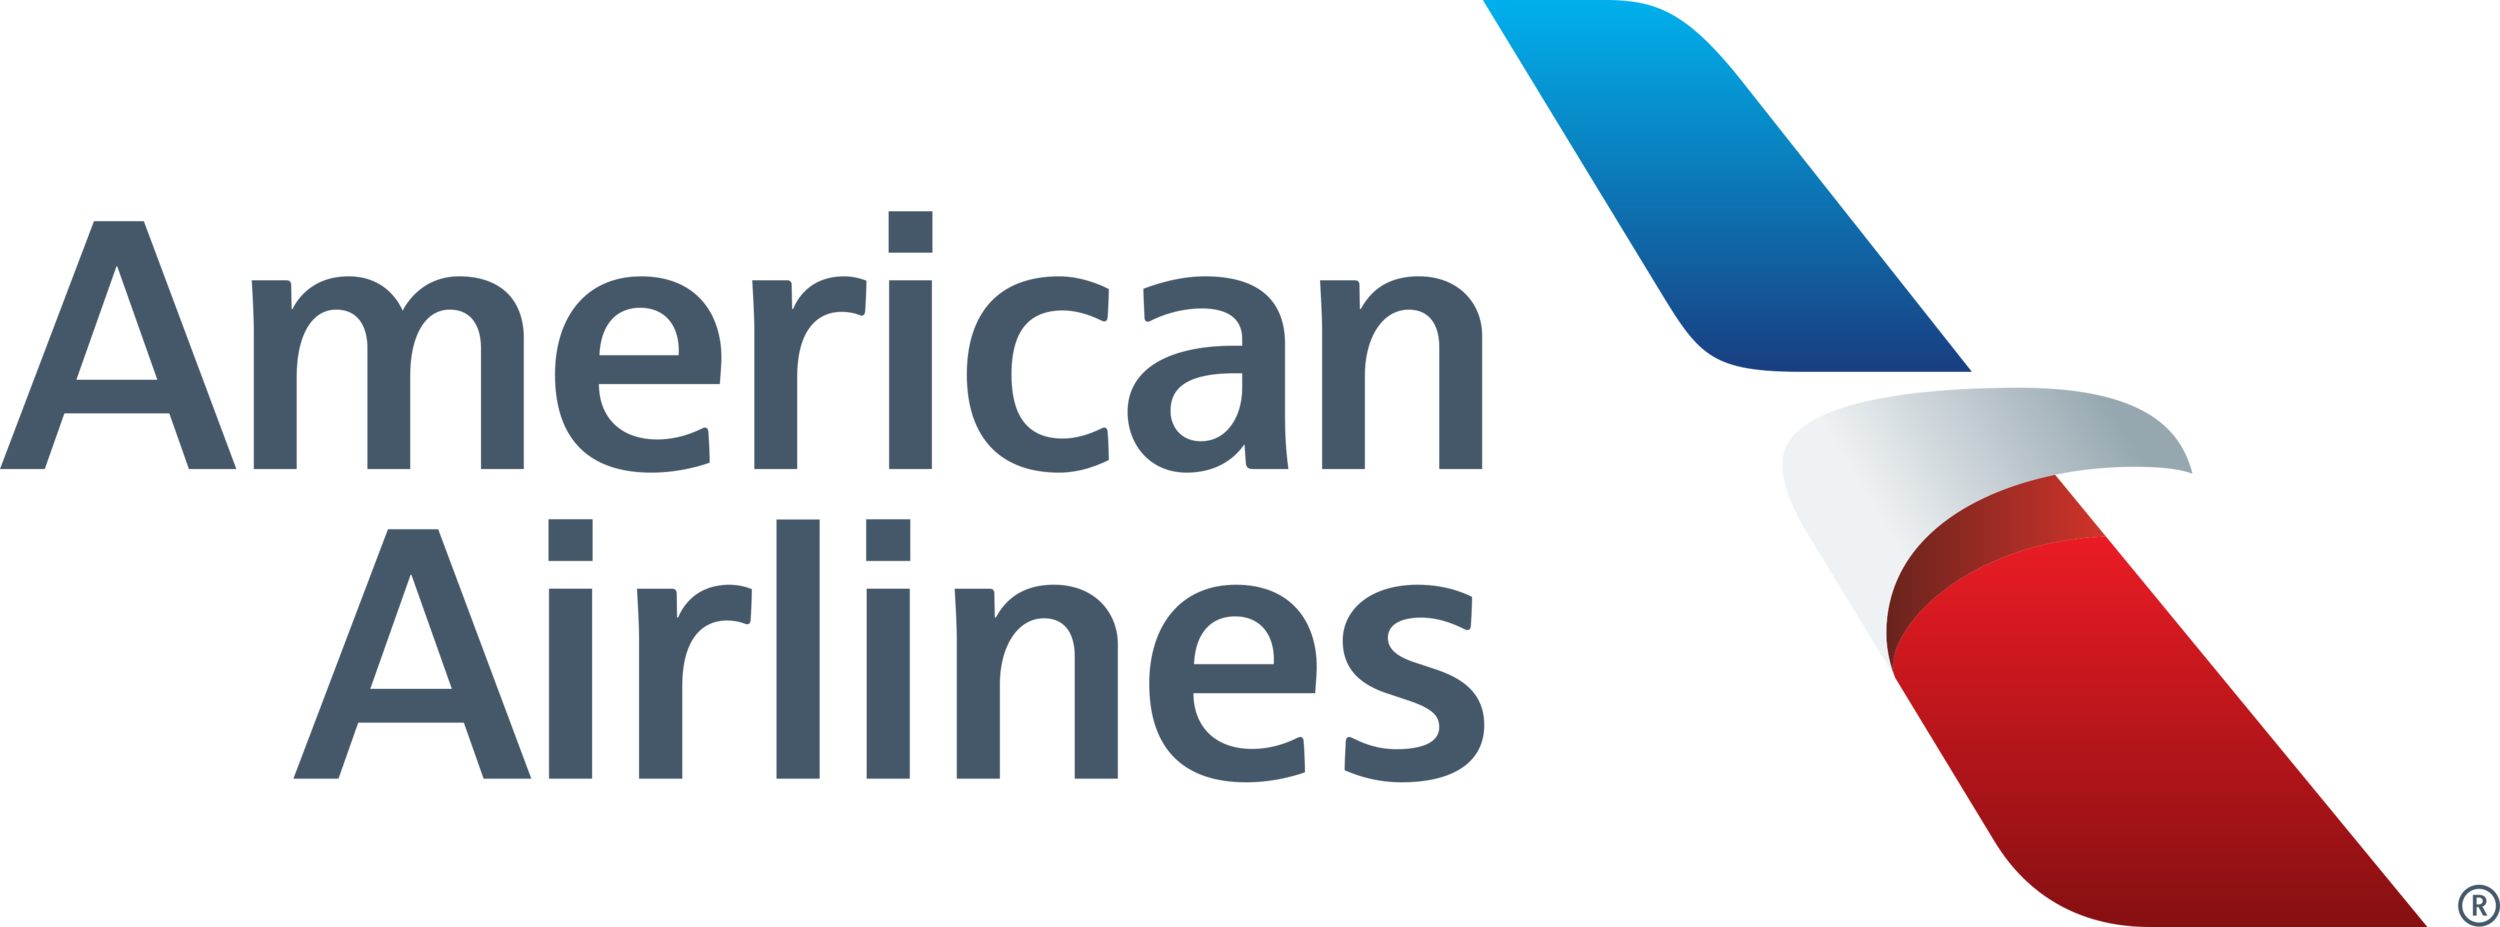 american-airlines-logo-1.png